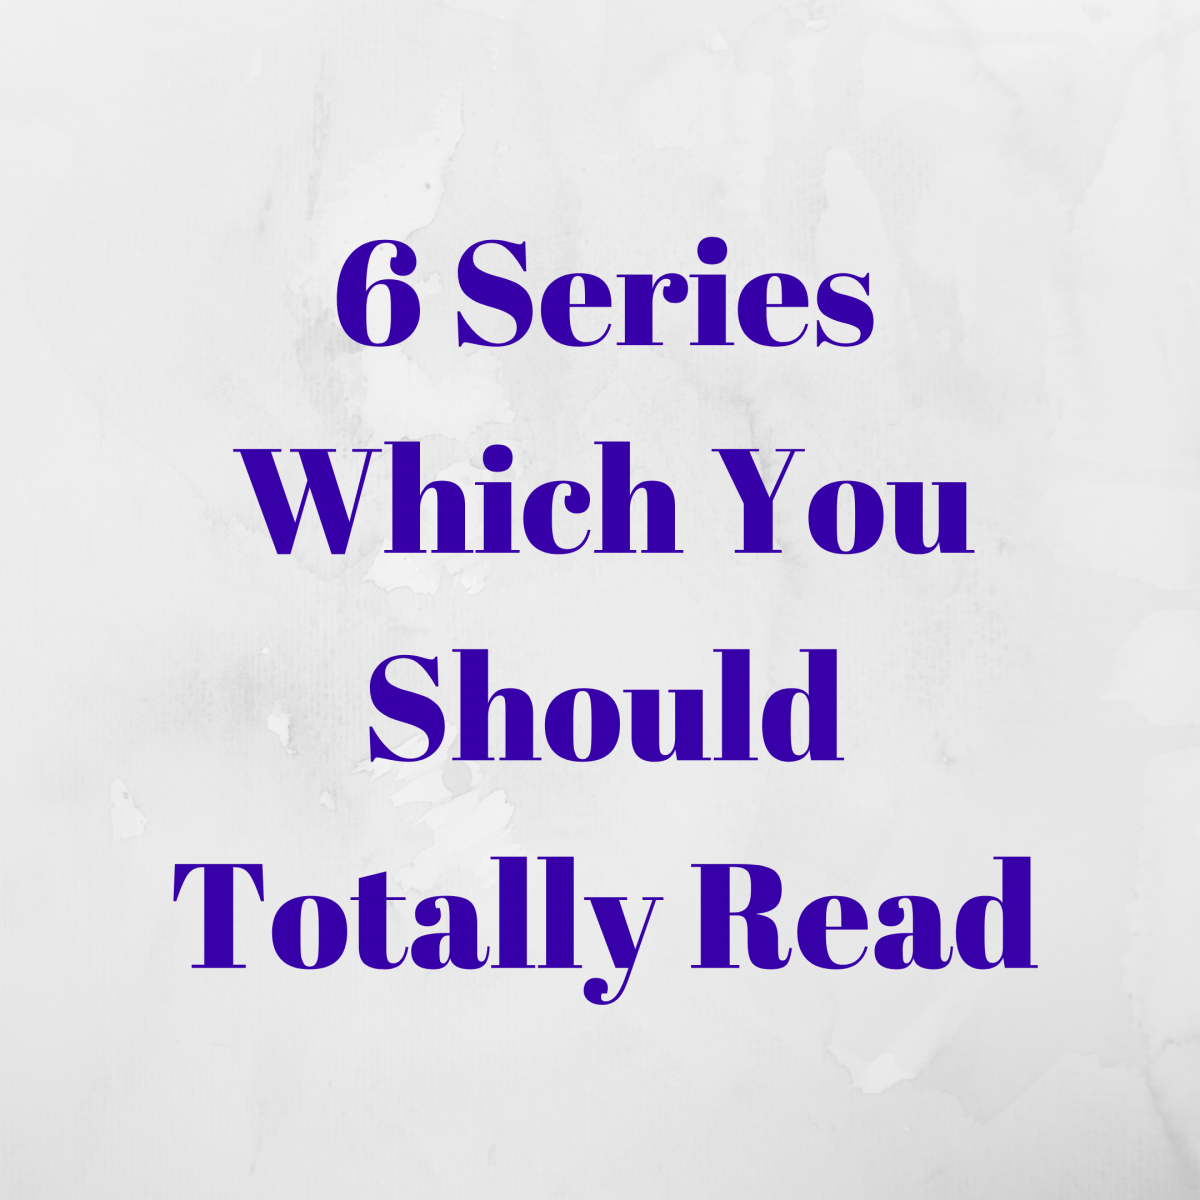 6 Book Series you Should Totally Read